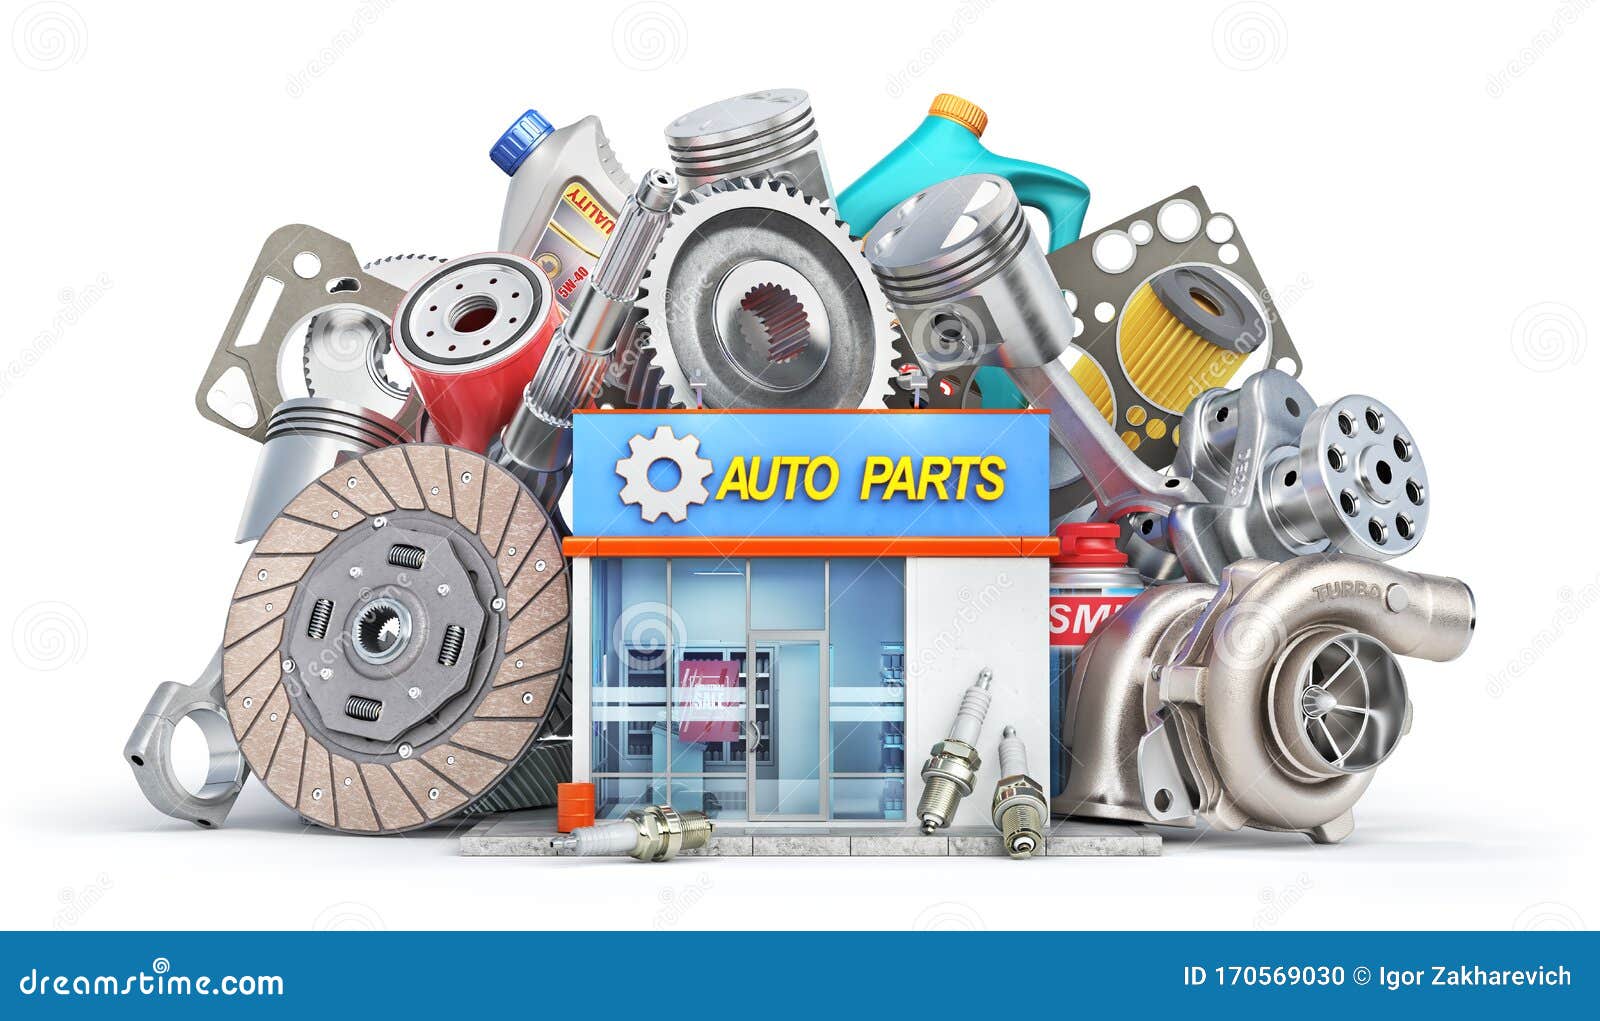 Auto Parts & Supply Business Names